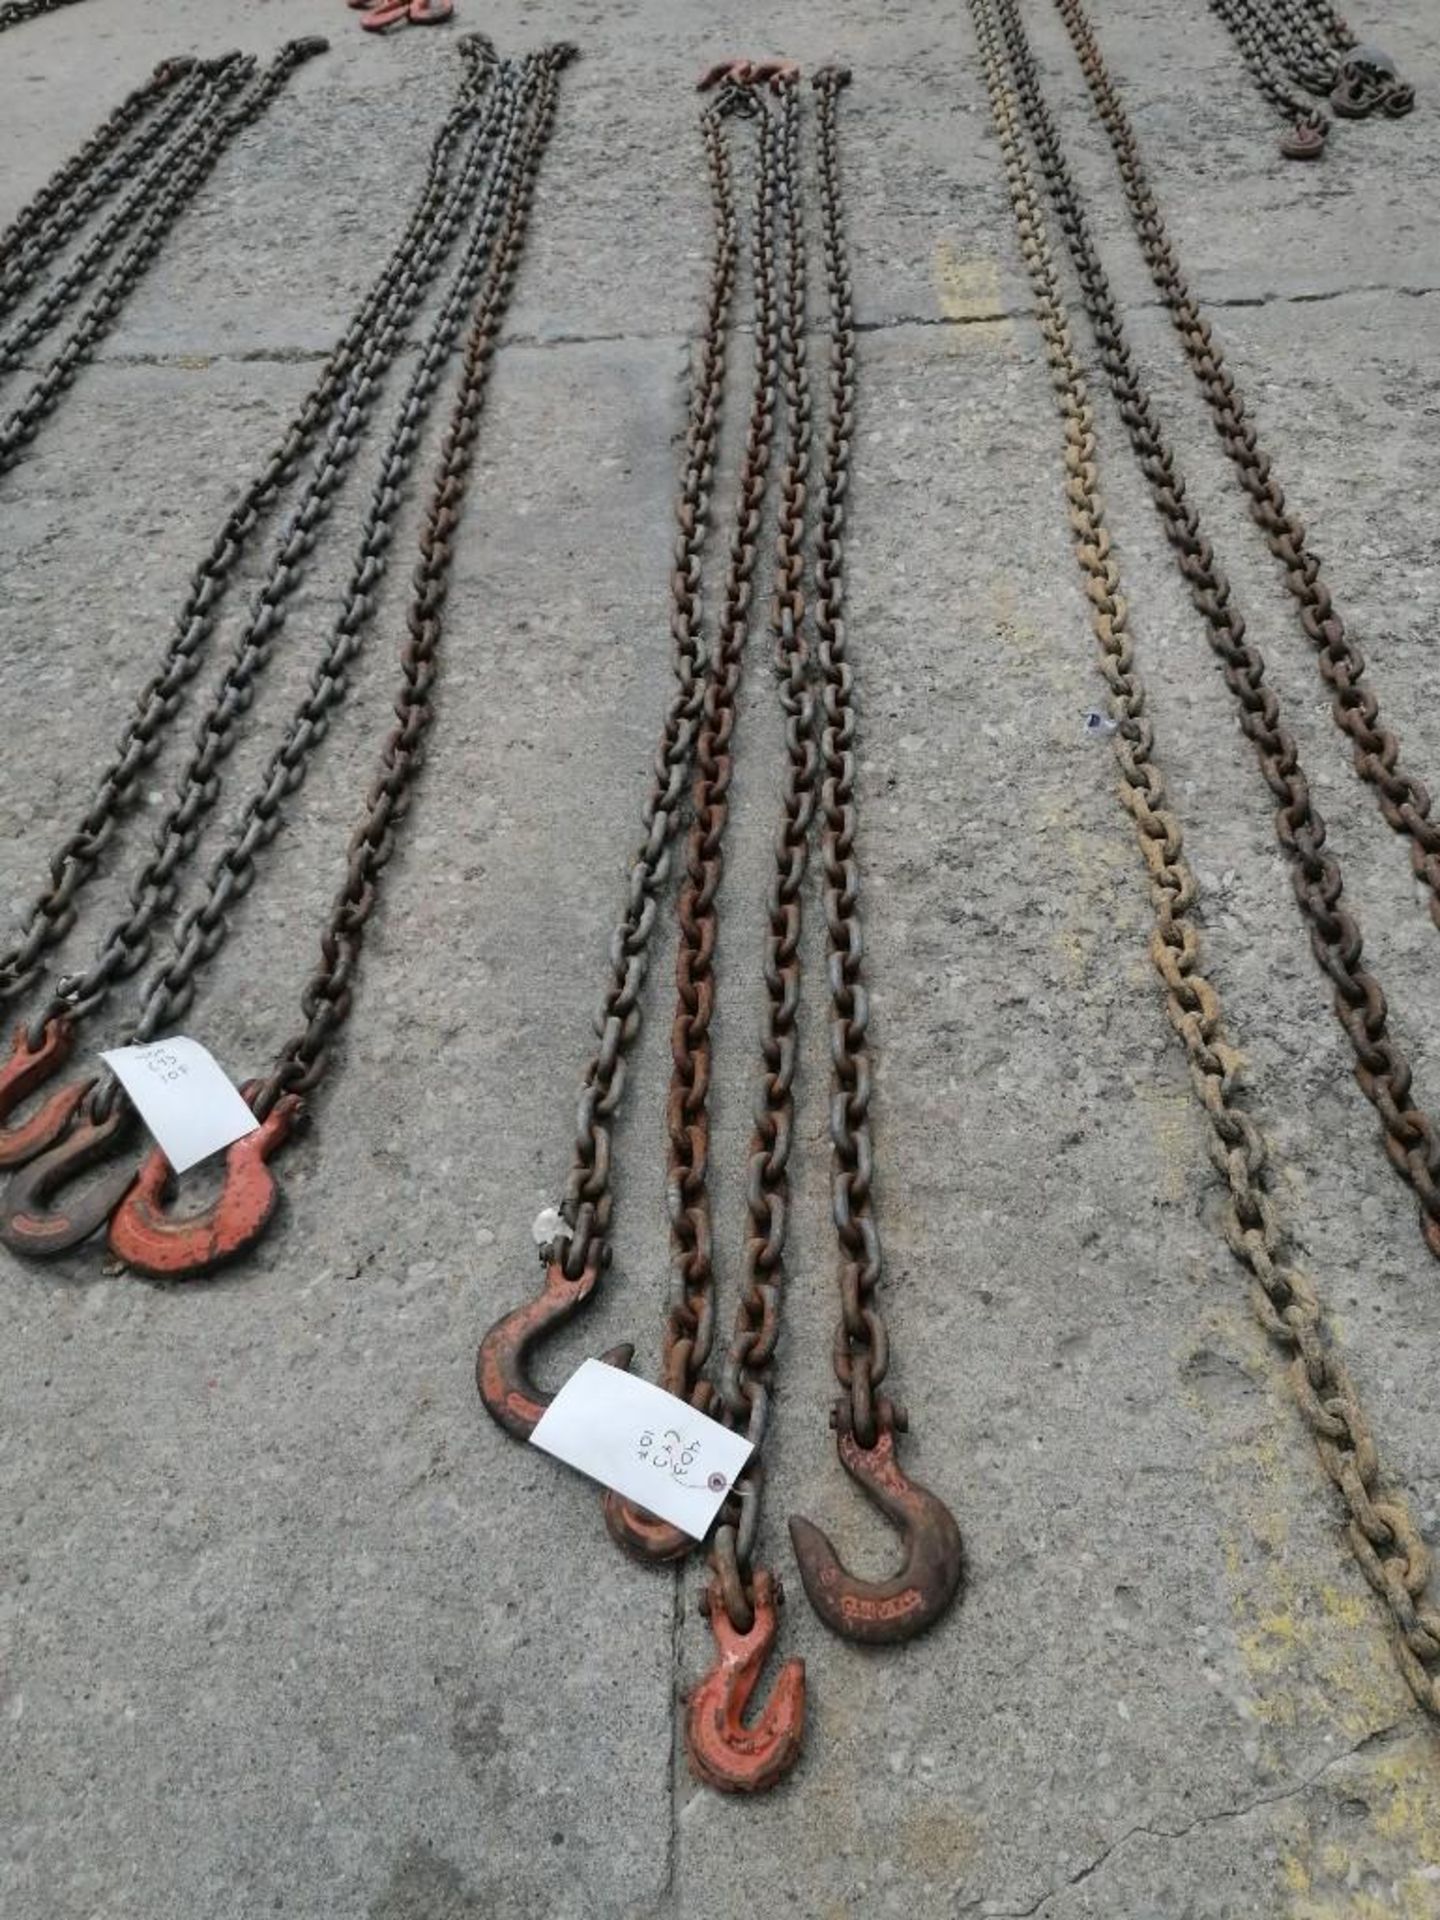 (4) 1/2" USA 10' Chain with hook. Located at 301 E Henry Street, Mt. Pleasant, IA 52641.